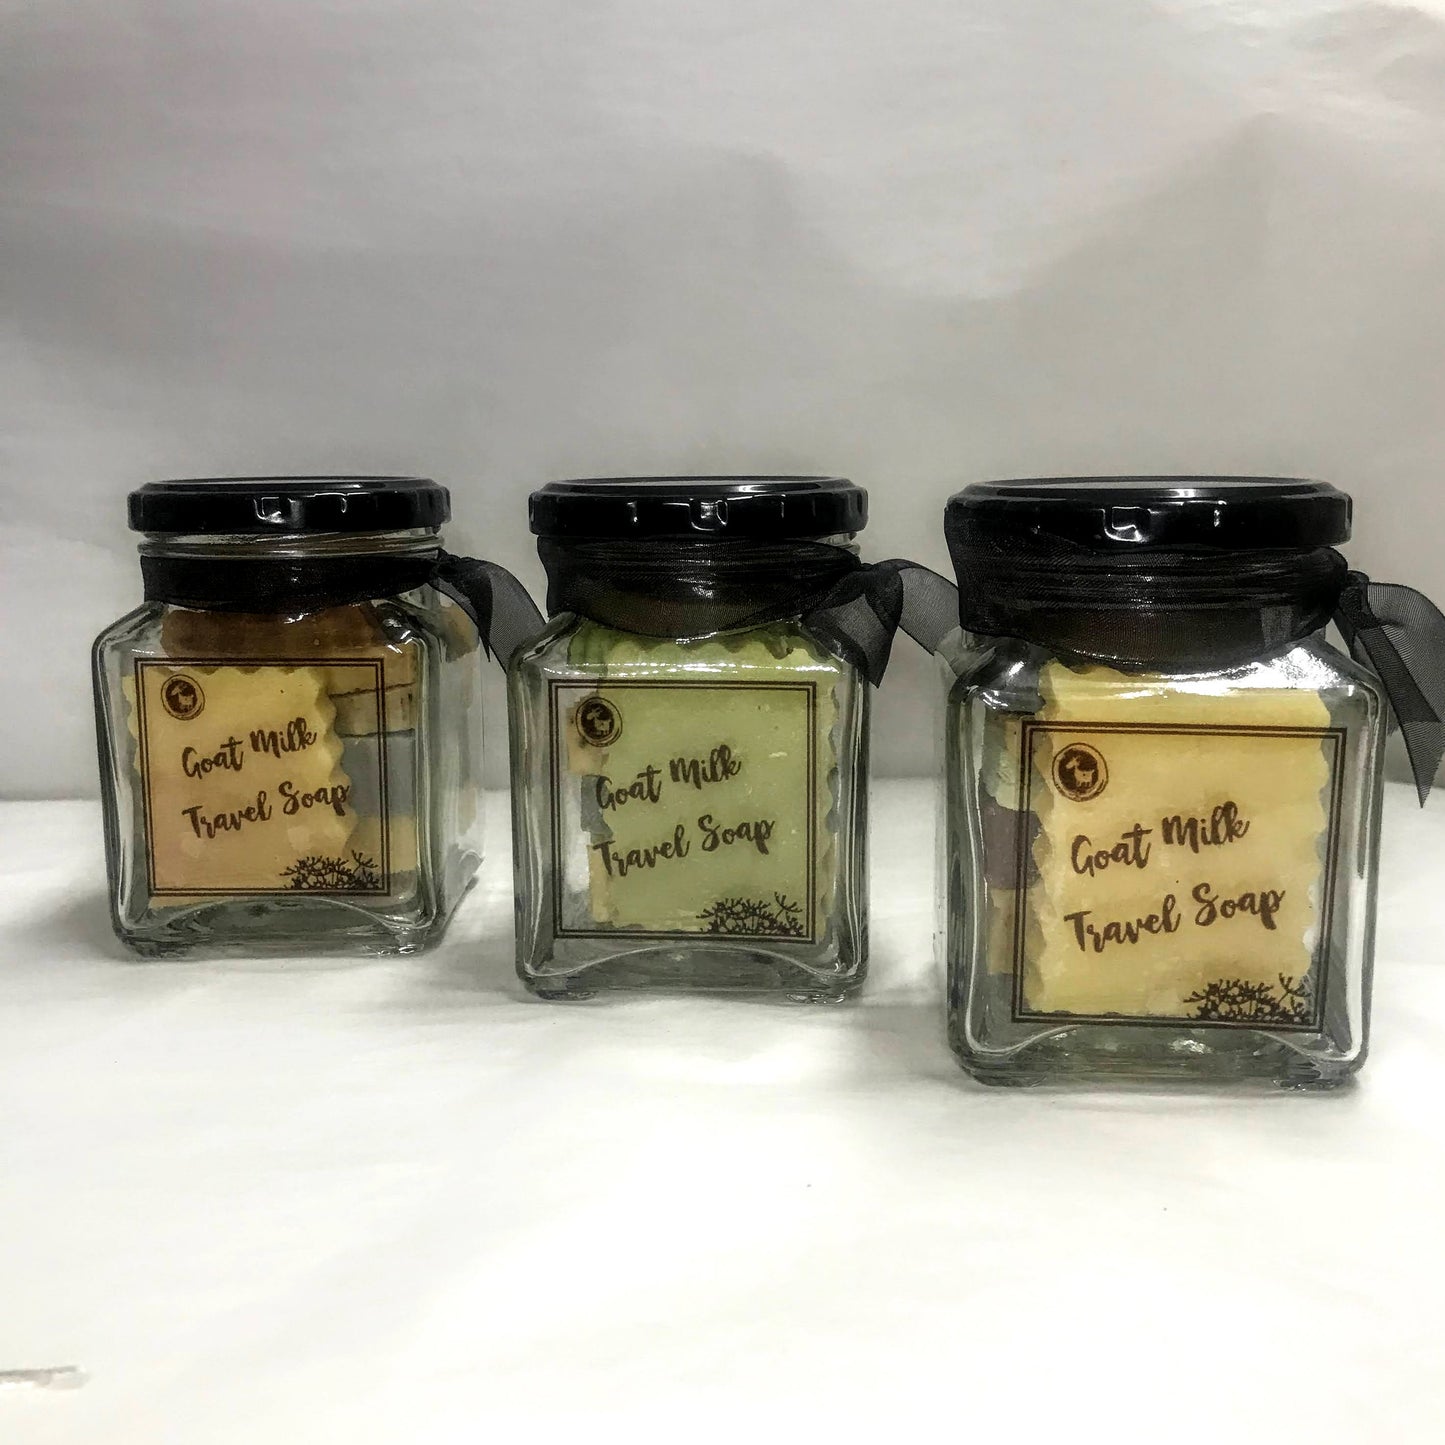 TRAVEL SOAP JARS - Mini travel or guest sized soaps in a jar